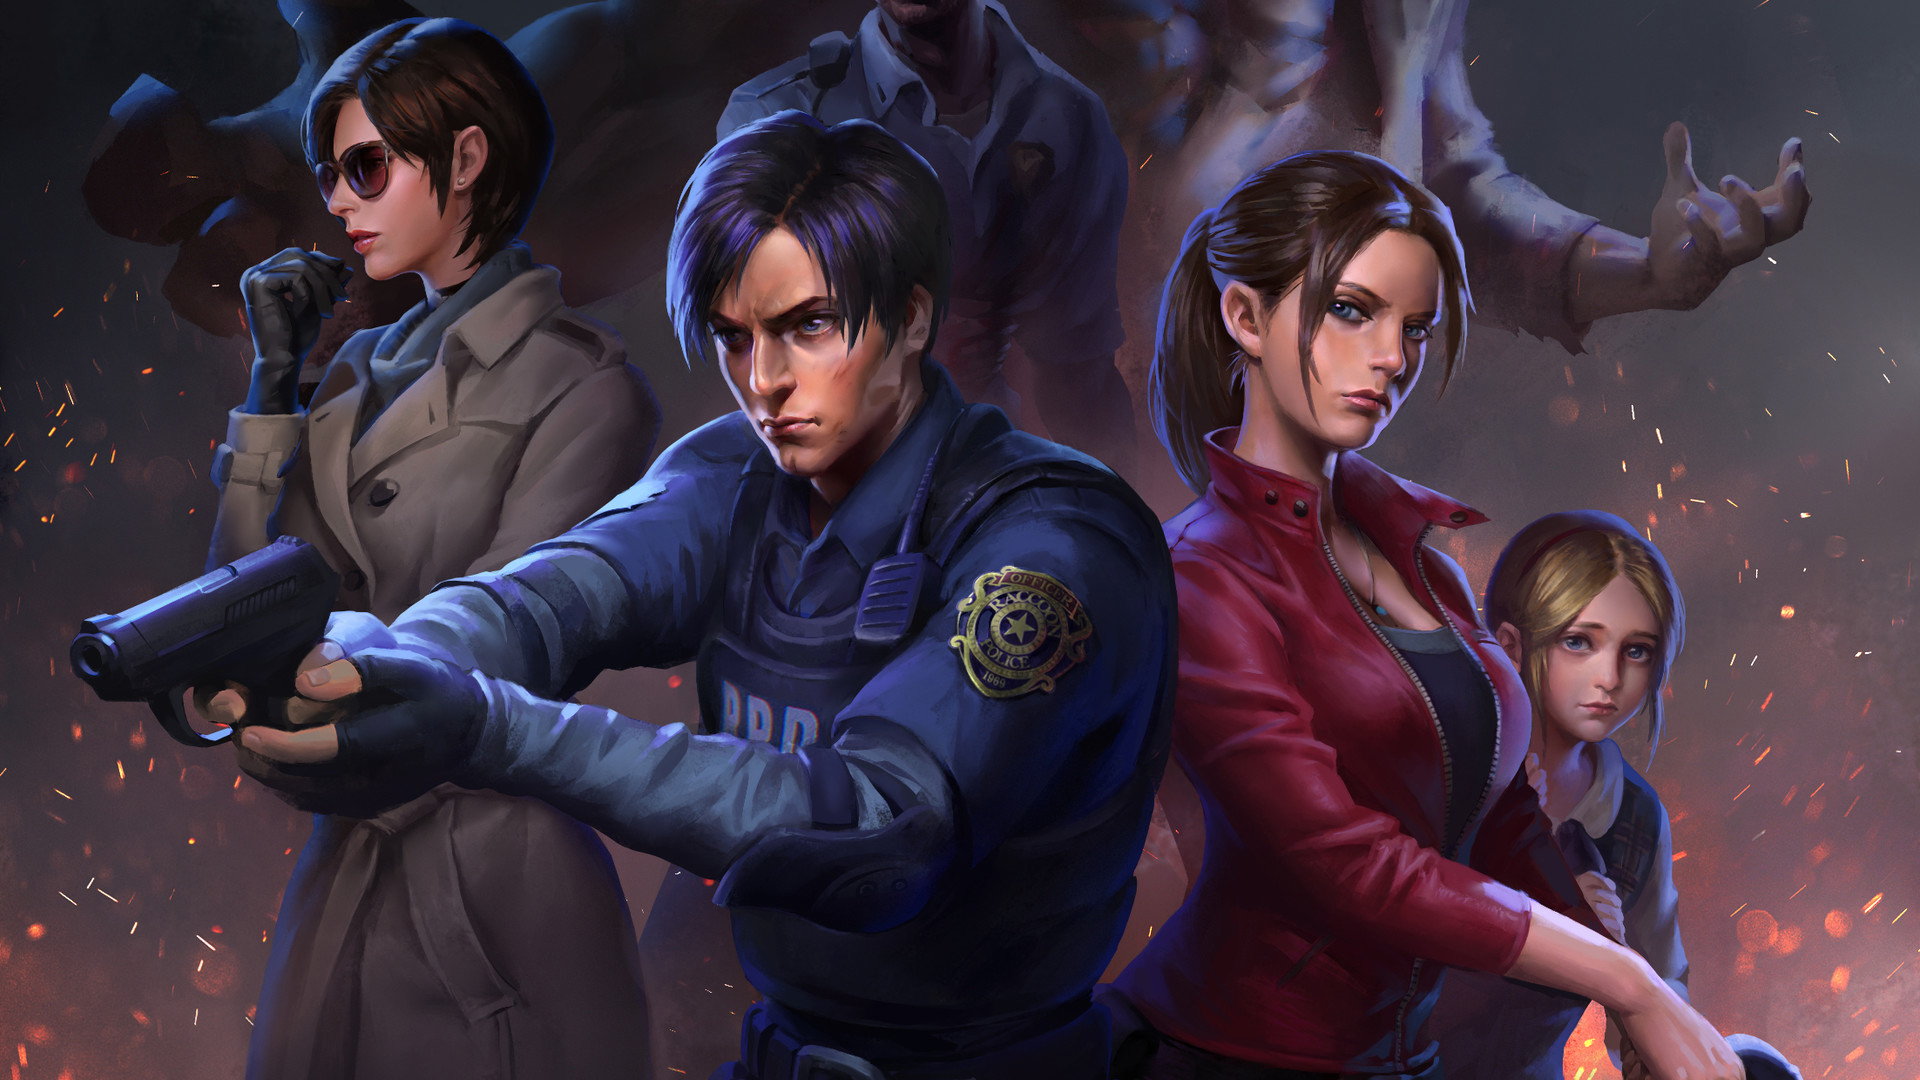 video game, resident evil 2 (2019), claire redfield, leon s kennedy, resident evil